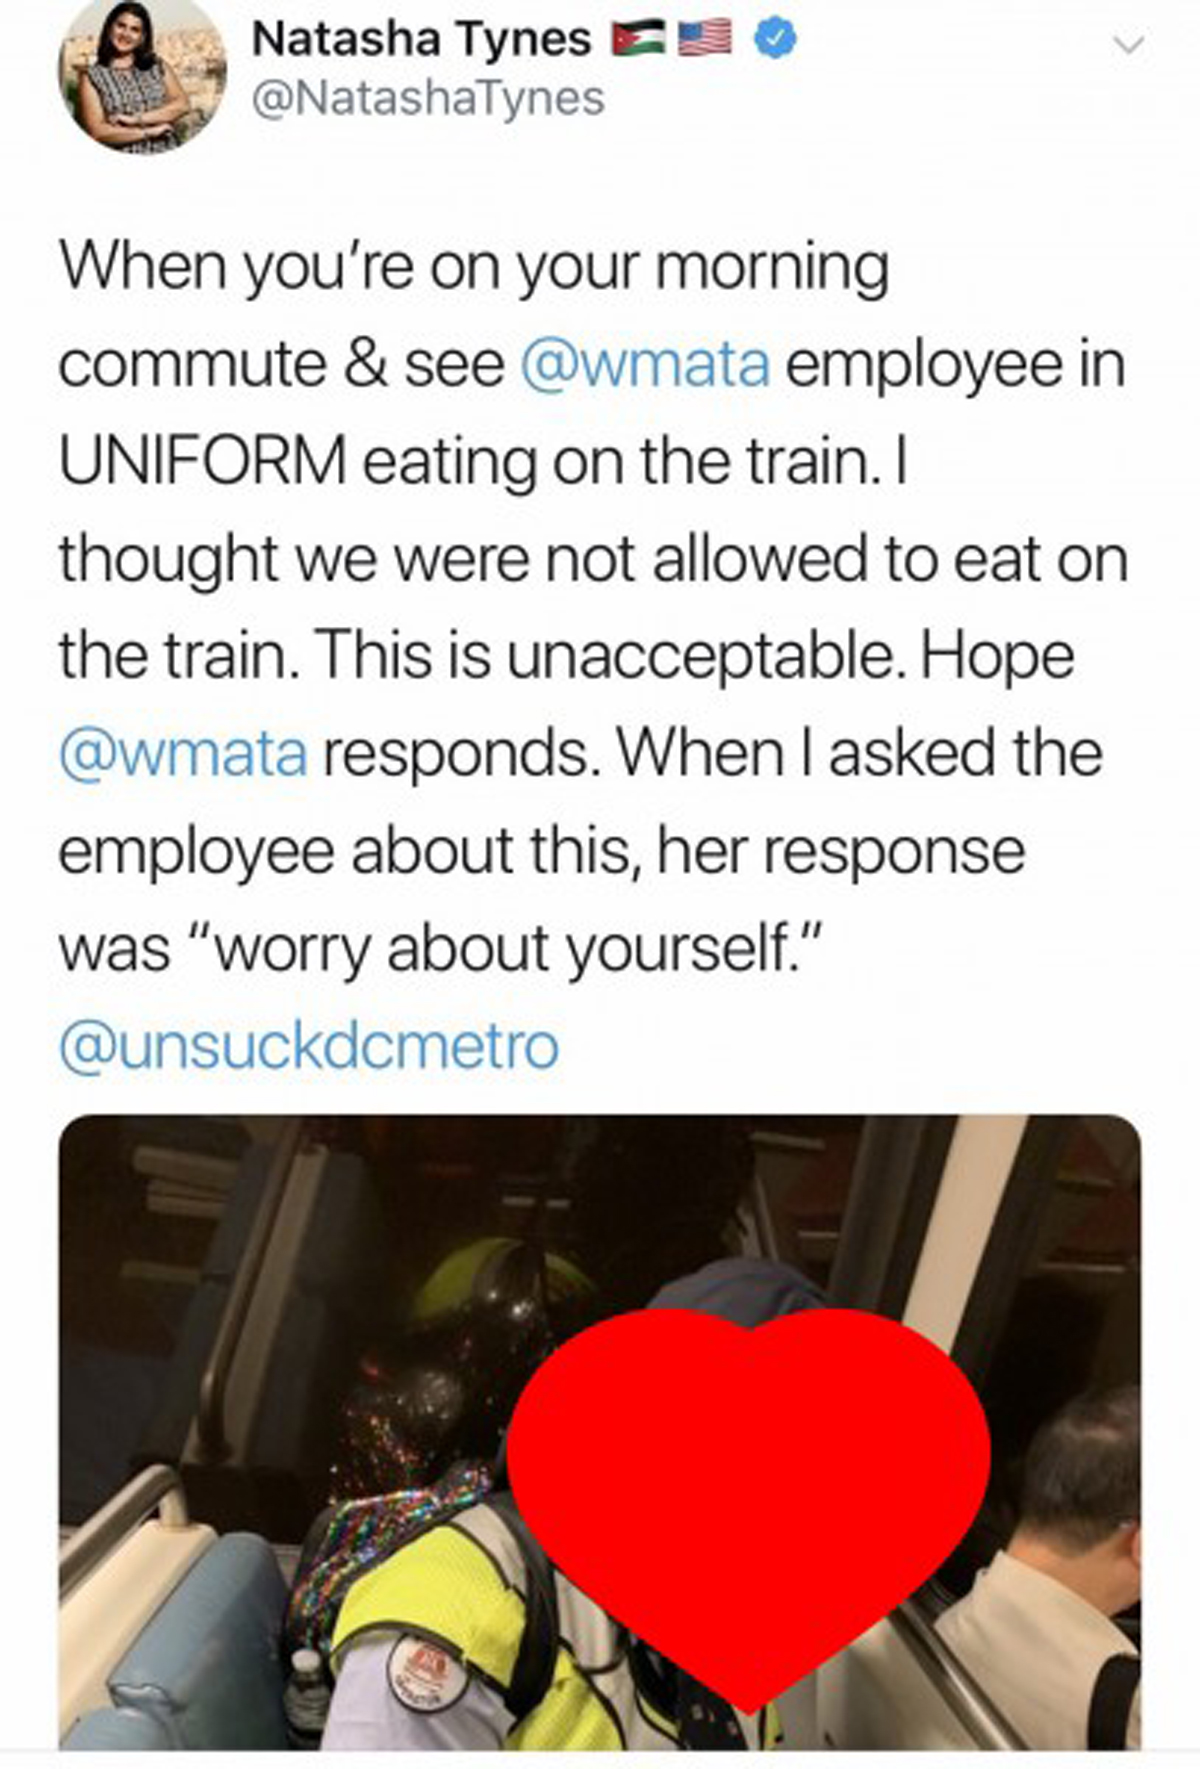 Minority author shamed a black transit worker for eating on the train. Now her book deal is in jeopardy

